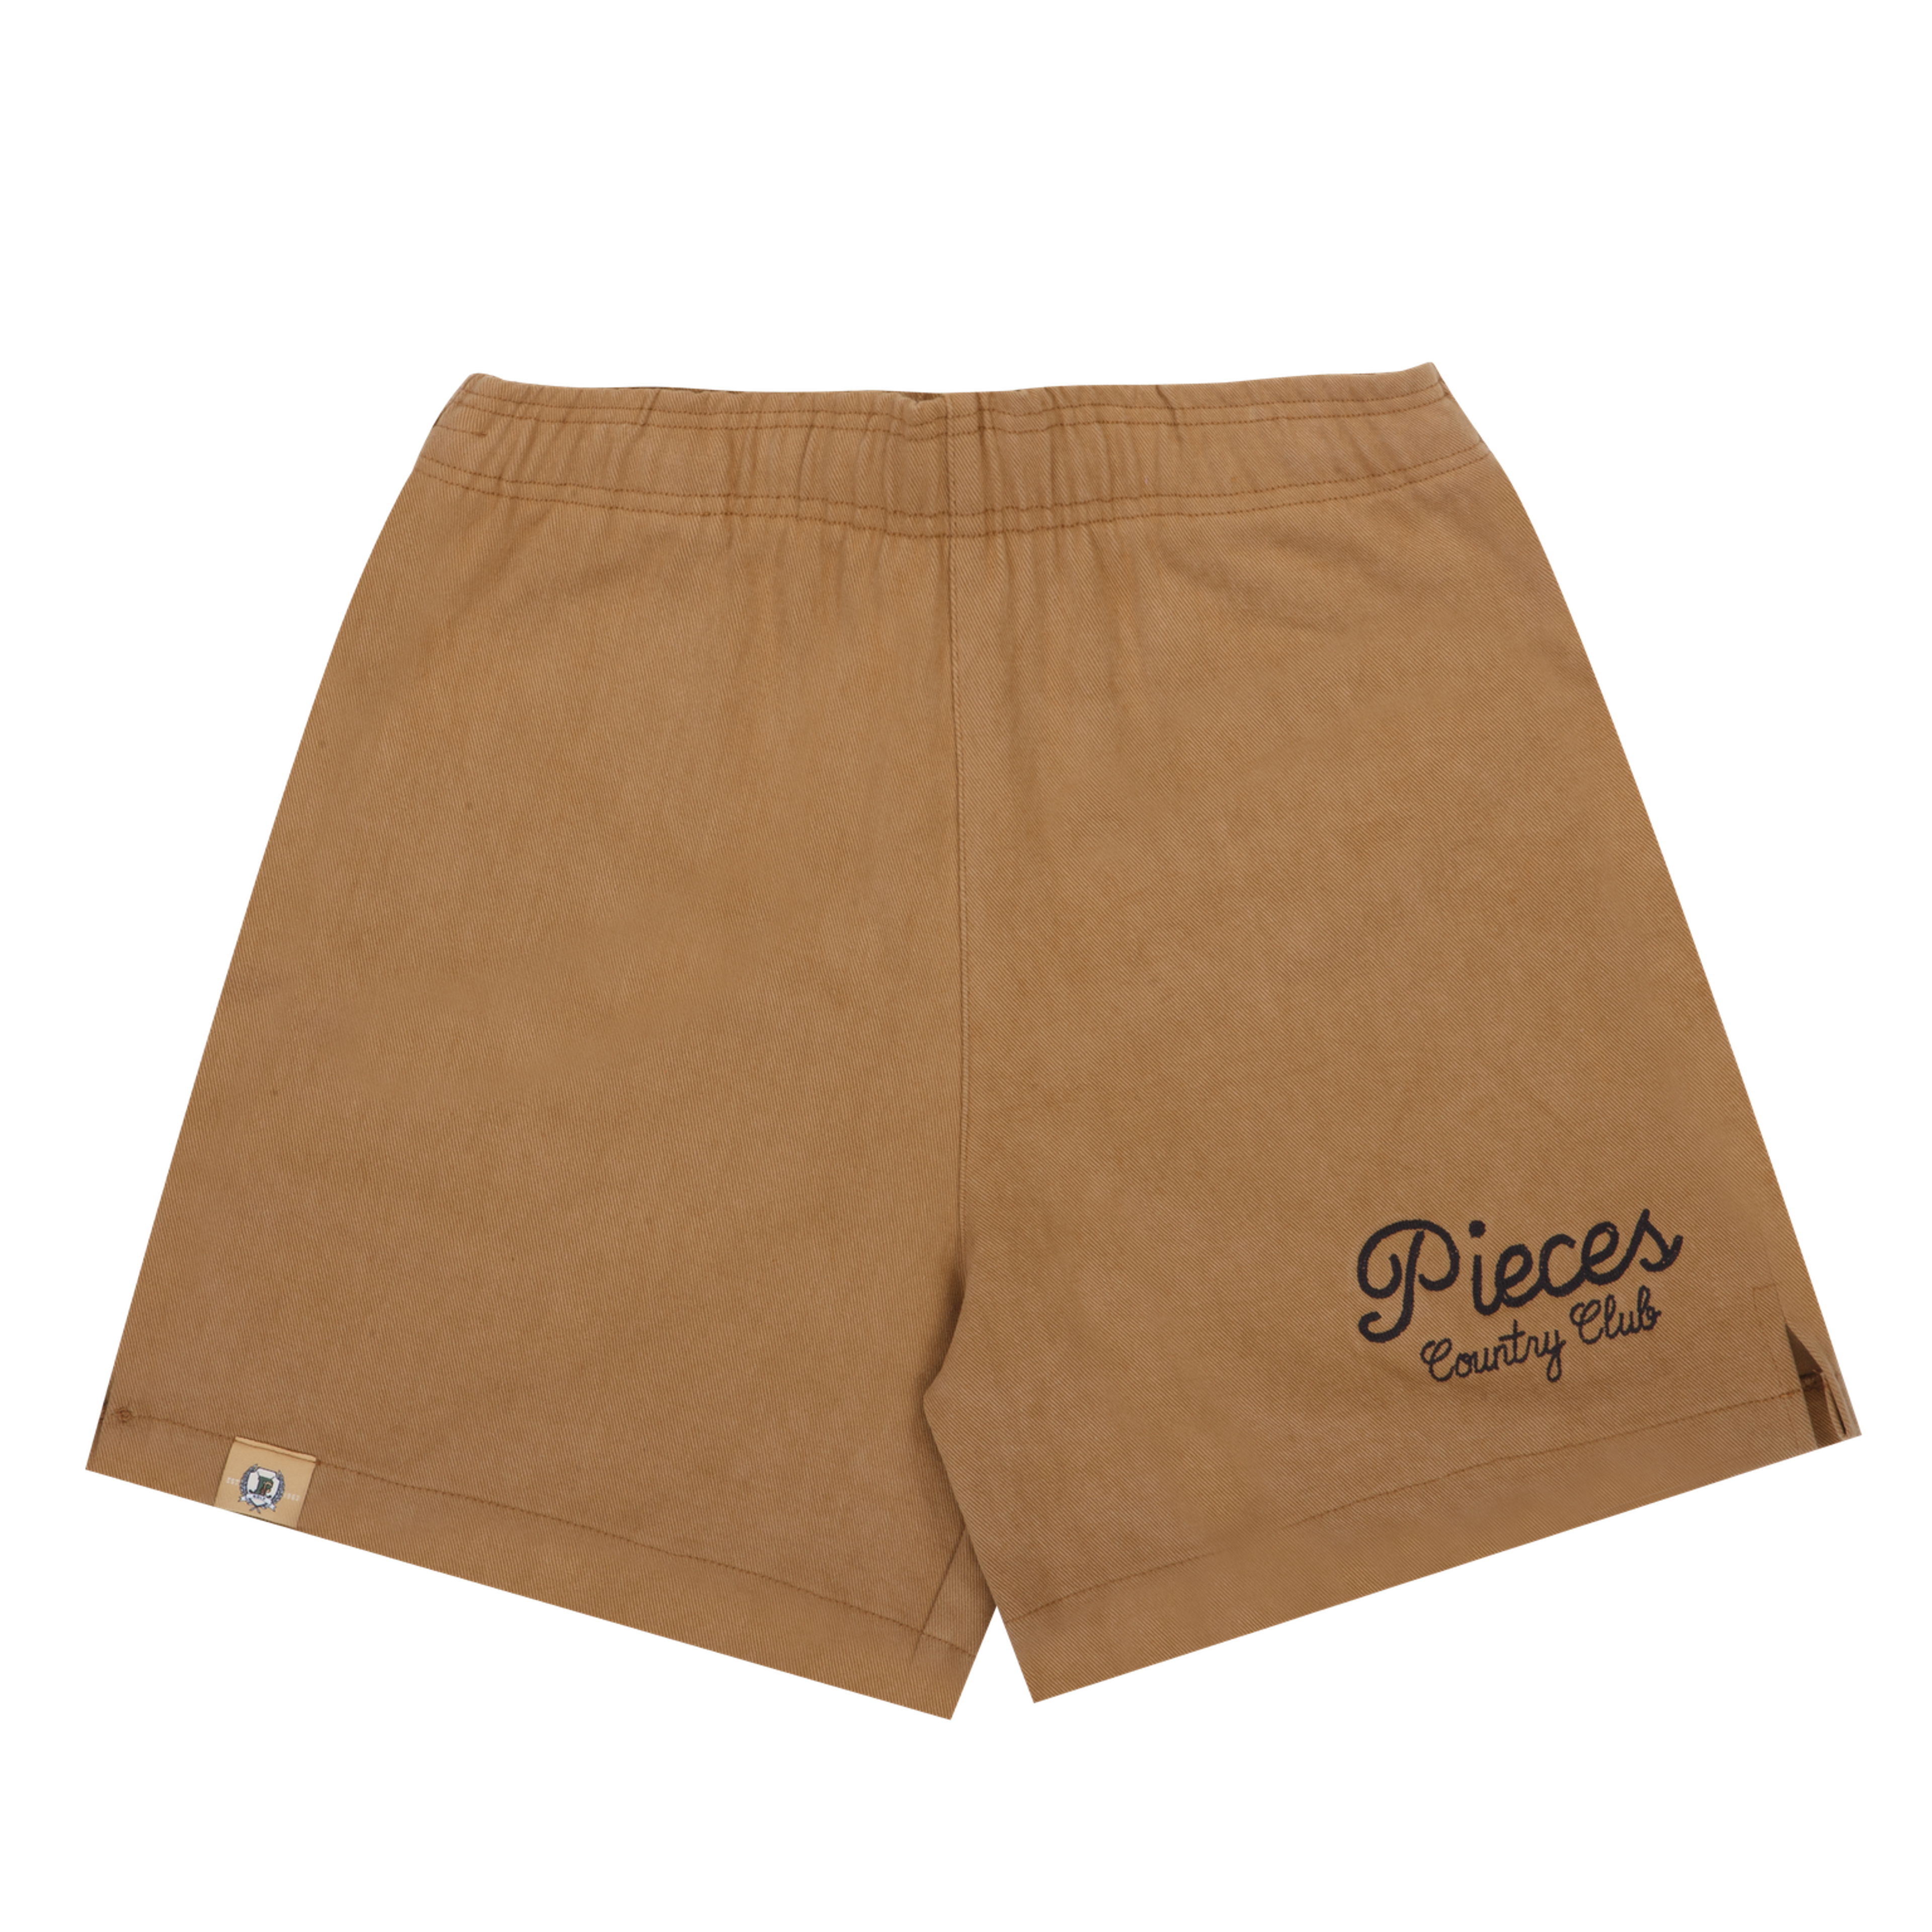 Pieces Country Club Shorts Camel